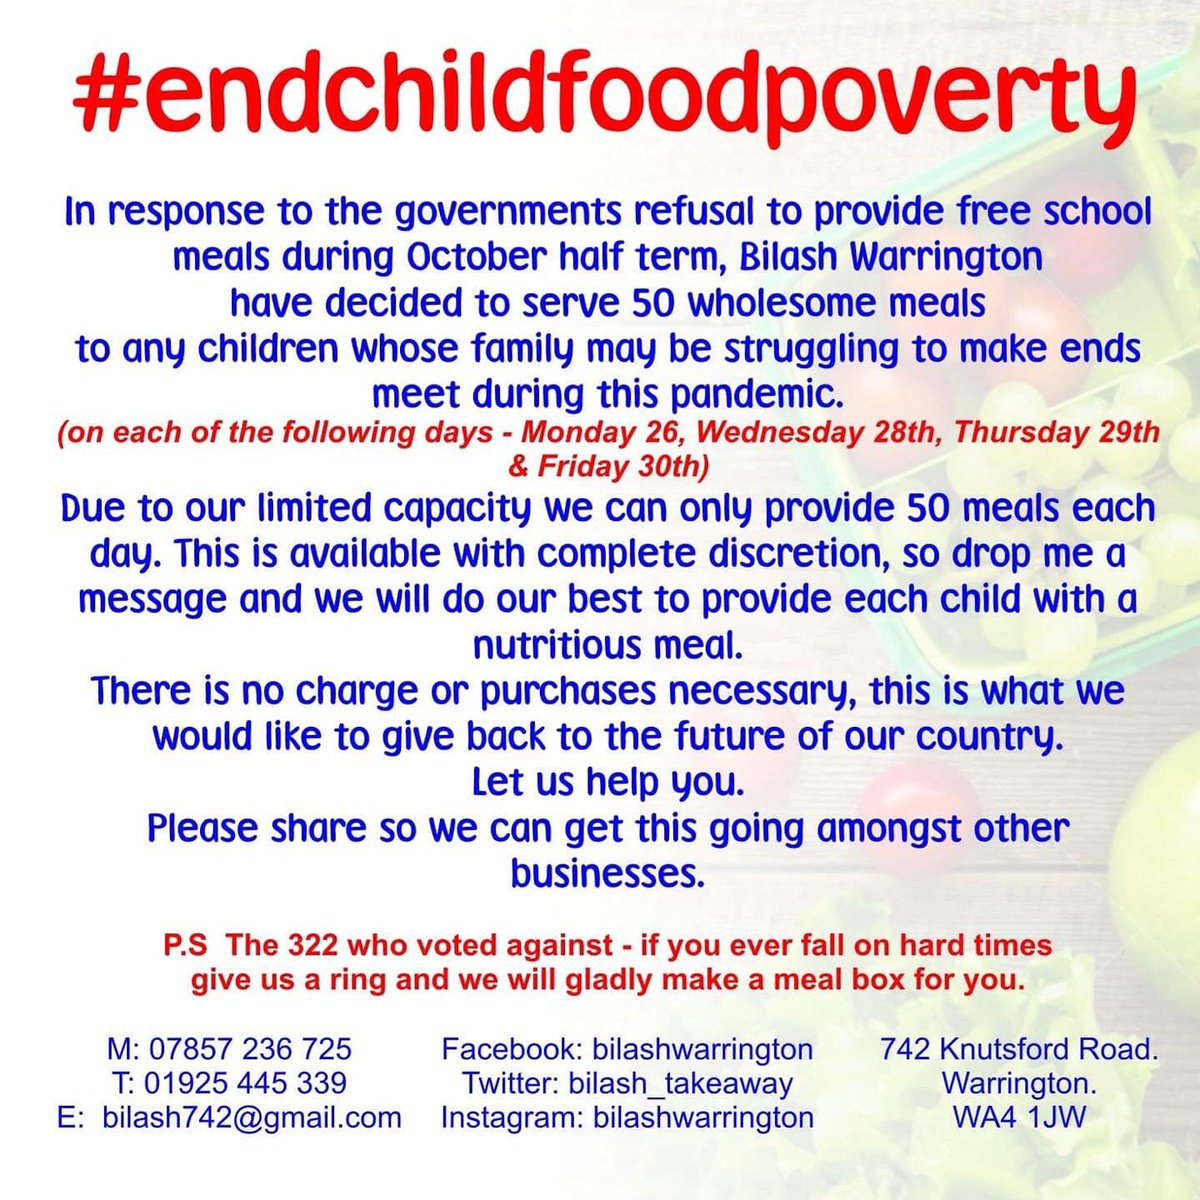 The message from a takeaway in Warrington to the 322 MPs who voted against free school meals at the end of their post offering free food is quite something. #ENDCHILDFOODPOVERTY